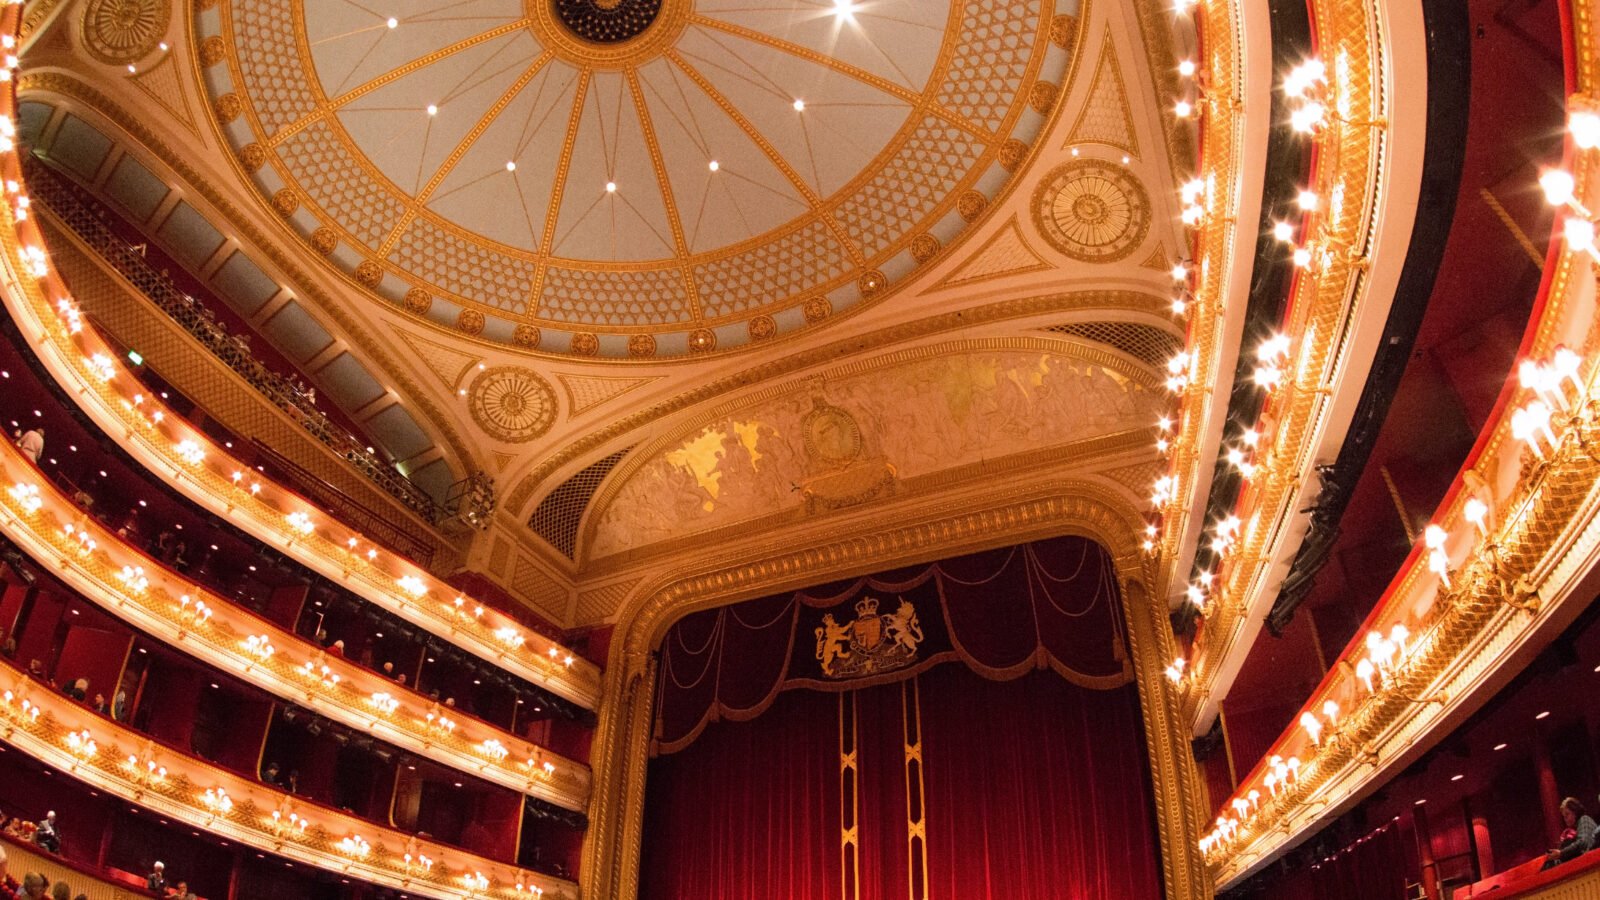 Performances from the Royal Opera House WFMT